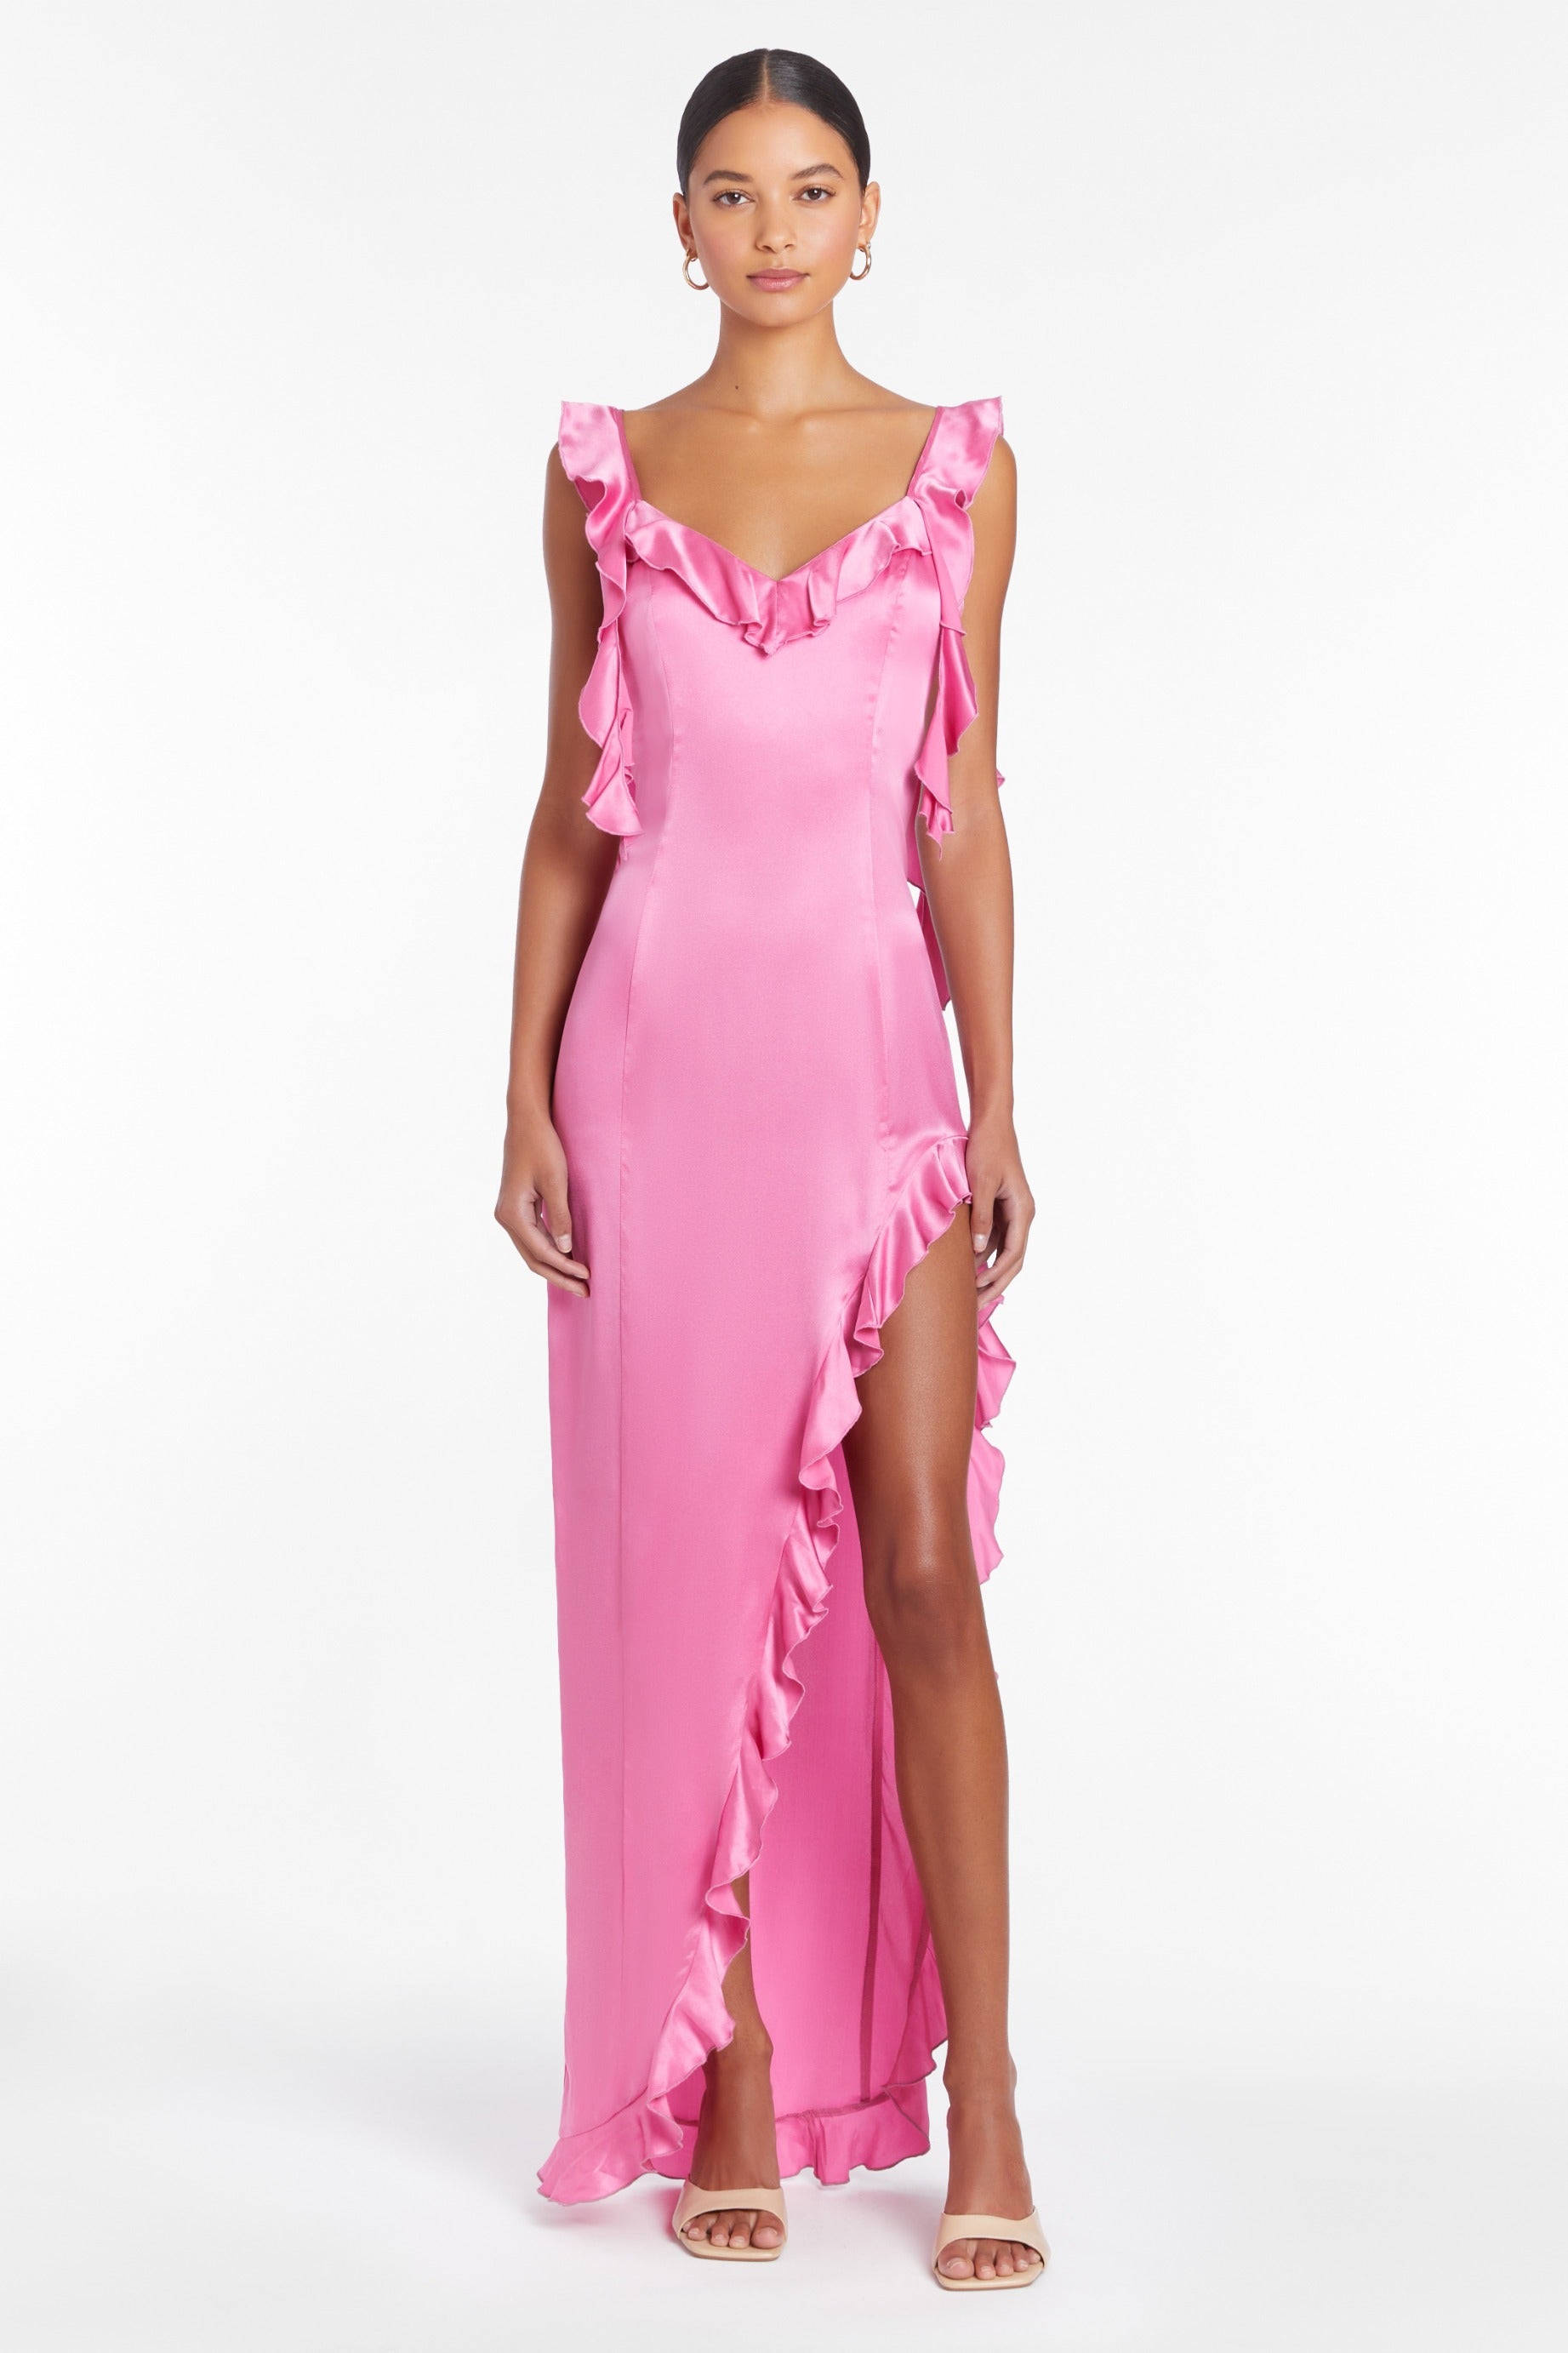 Gucci Pink Silk Gown - Janet Mandell